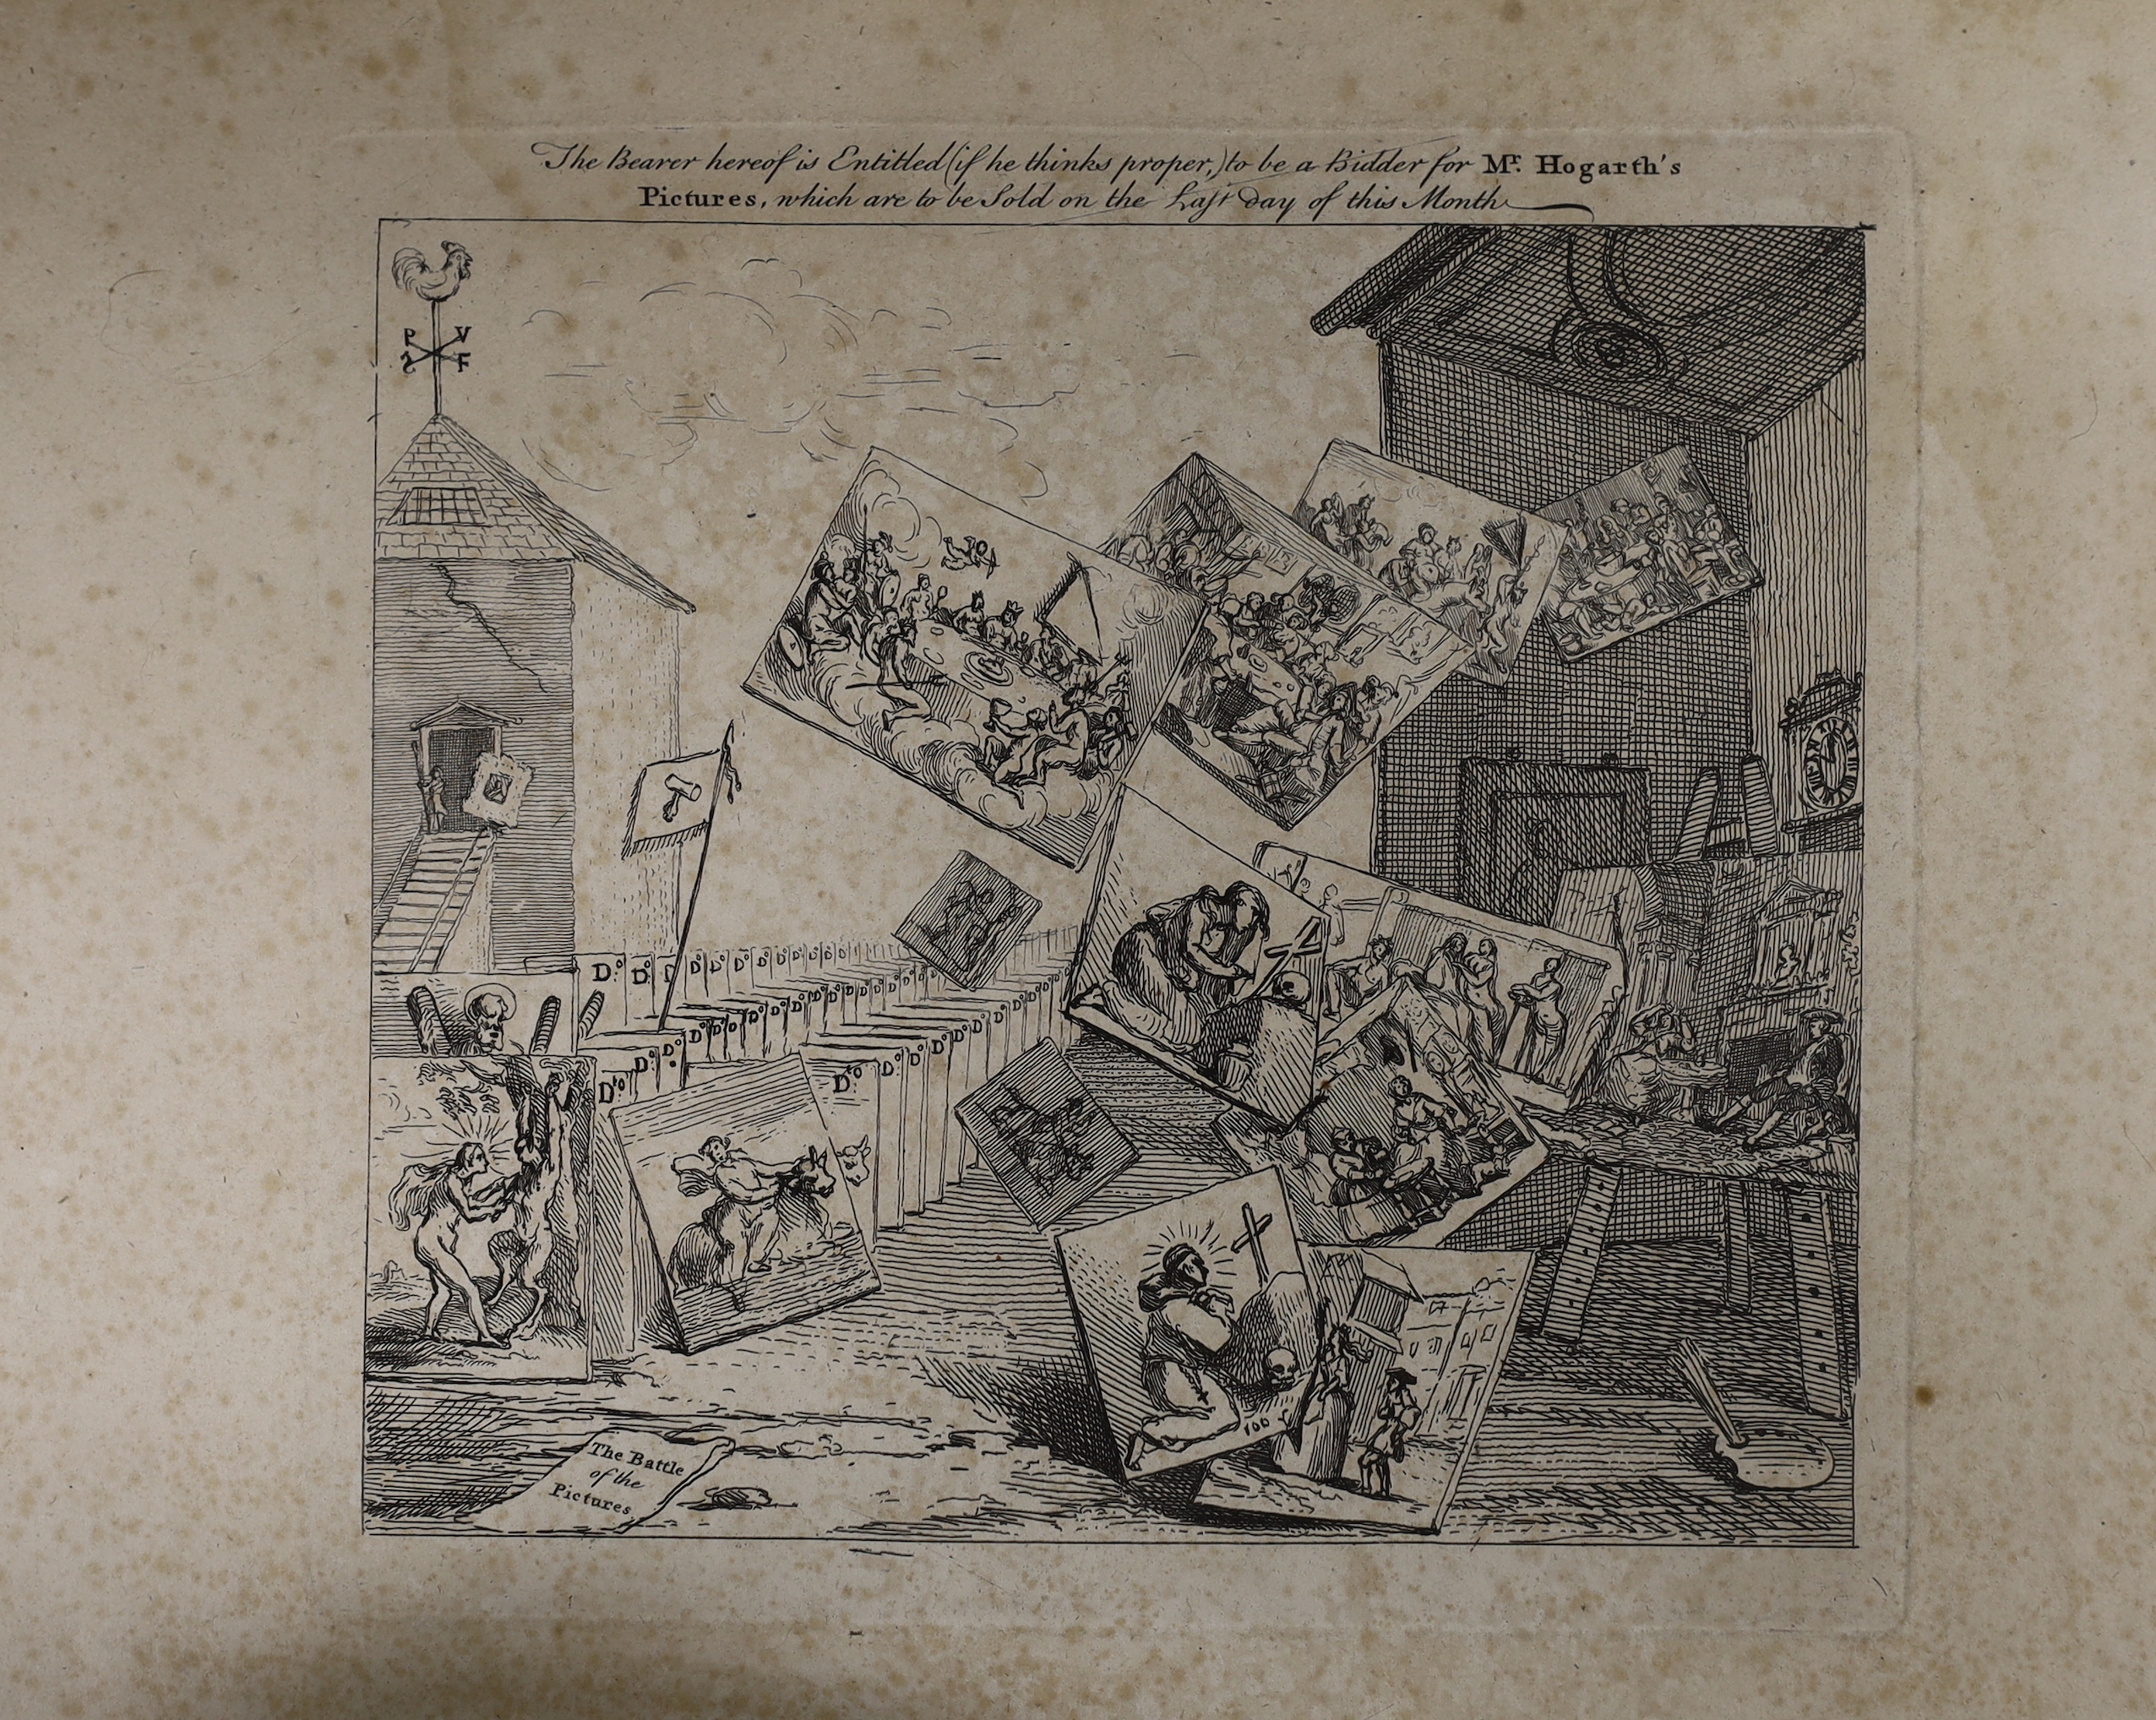 After William Hogarth (1697-1764), satirical etching, 'The Battle of the Pictures', unframed, together with a monochrome watercolour, signed W. Hogarth, largest 29 x 36cm, unframed